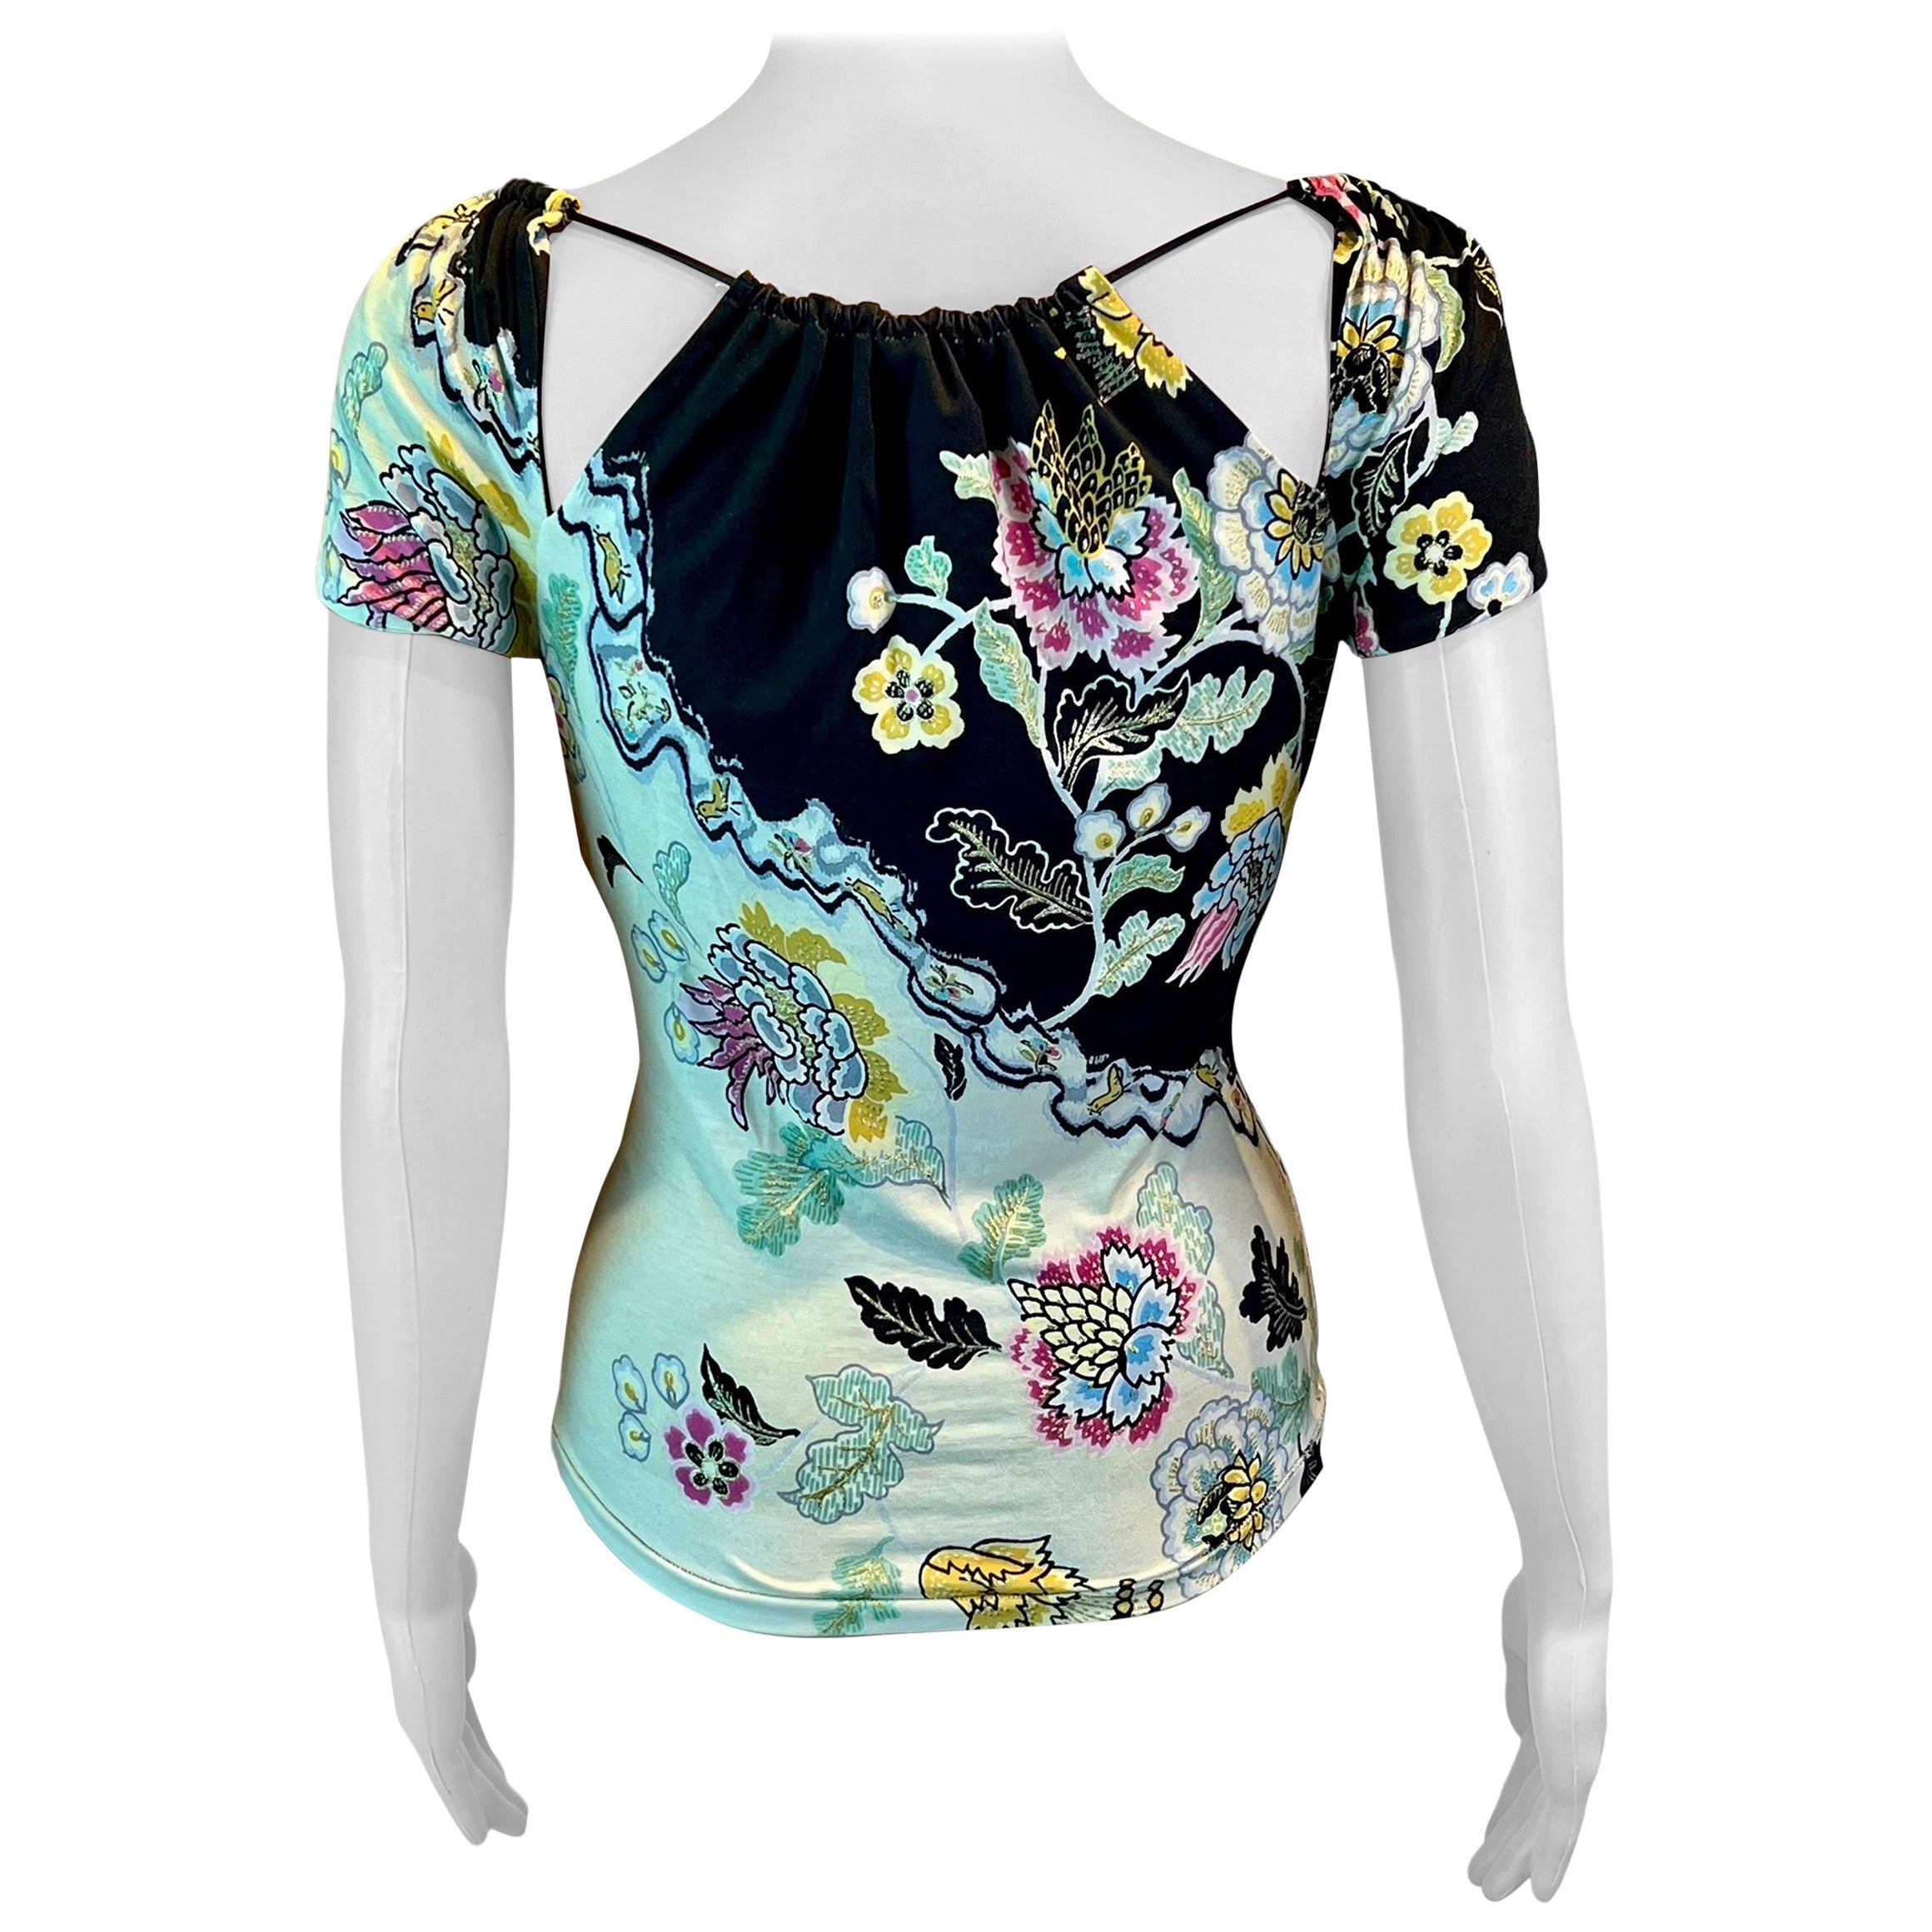 Roberto Cavalli S/S 2003 Chinoiserie Print Cutout Blouse Top For Sale